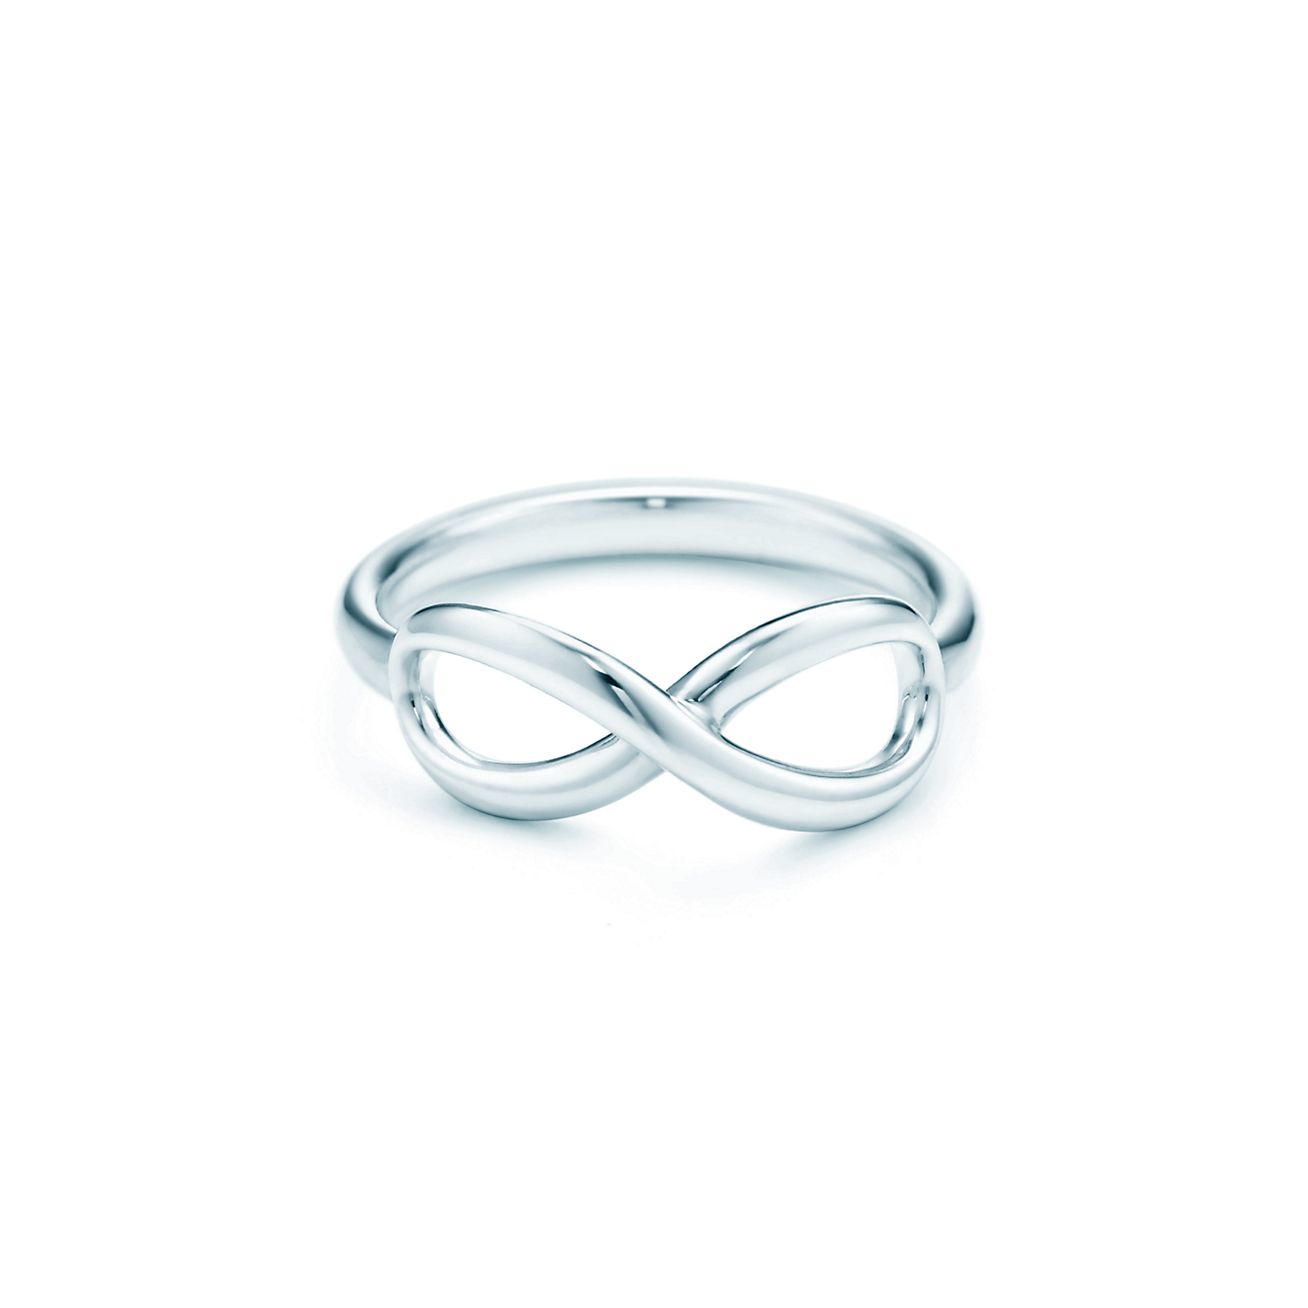 Tiffany Forever Wedding Band Ring in Rose Gold, 2.5 mm Wide | Tiffany & Co.